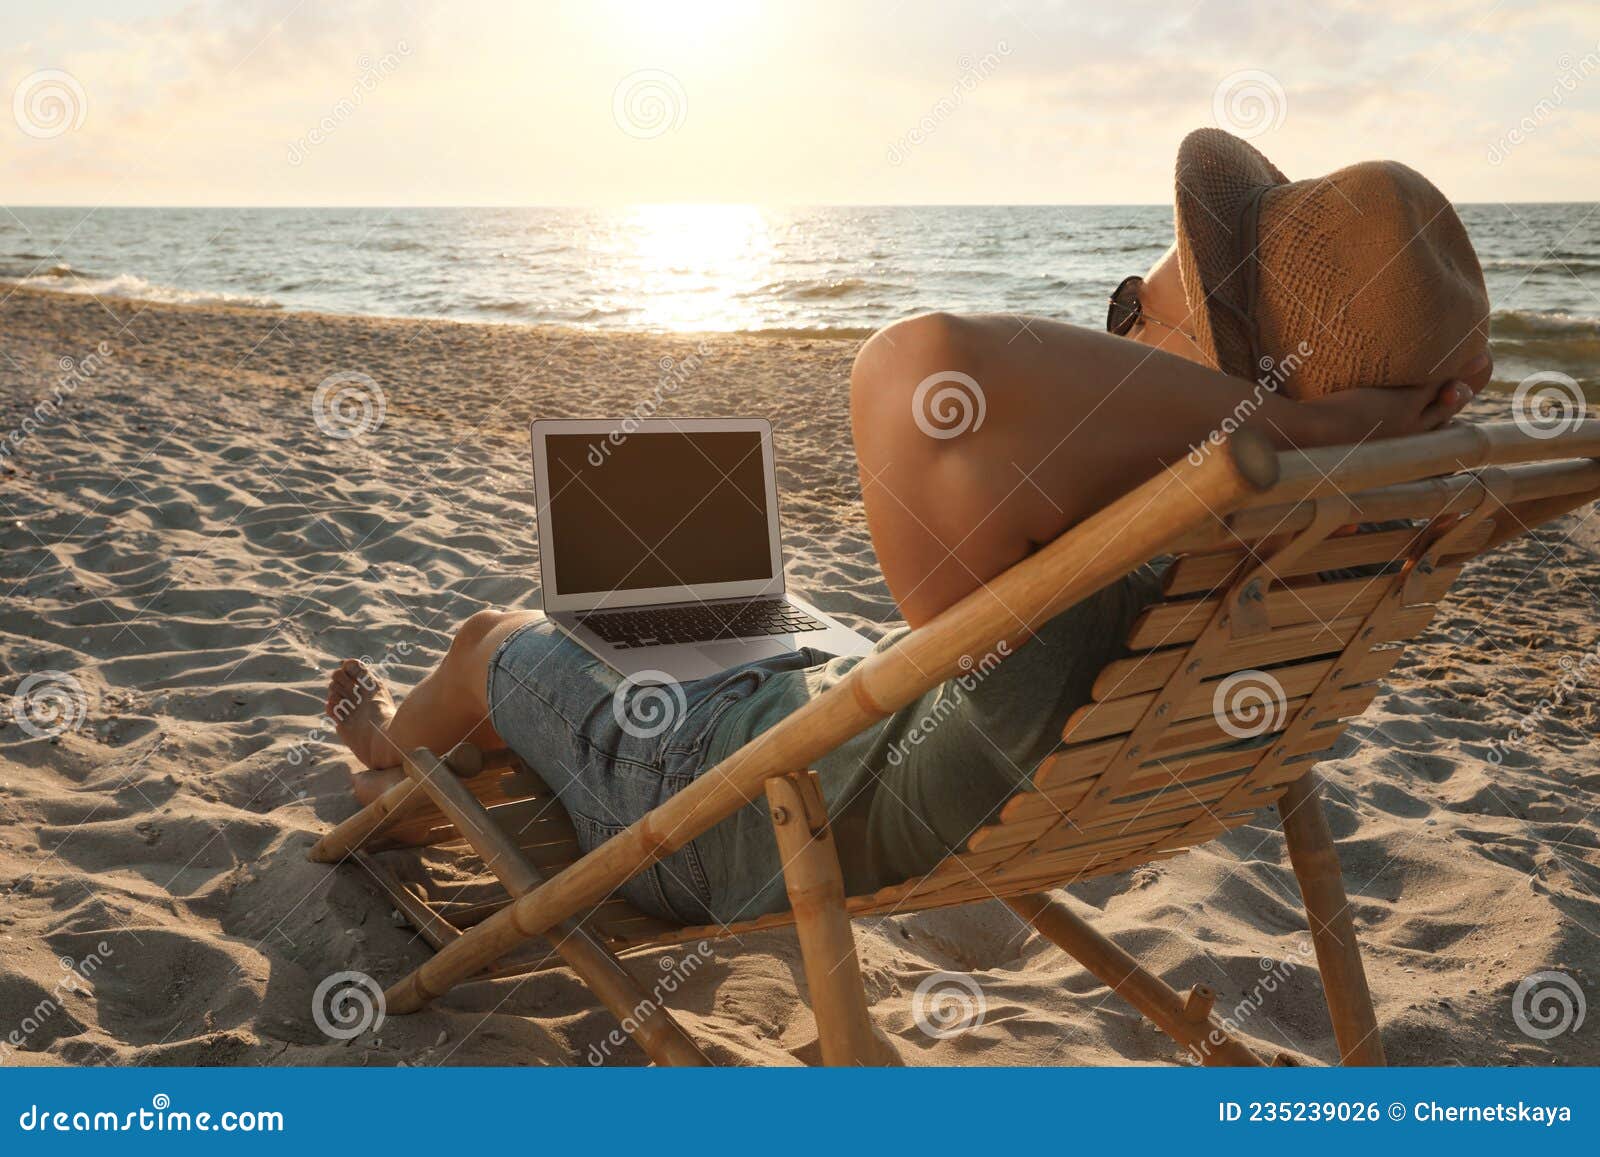 Man with Laptop Relaxing in Deck Chair on Beach Stock Photo - Image of ...